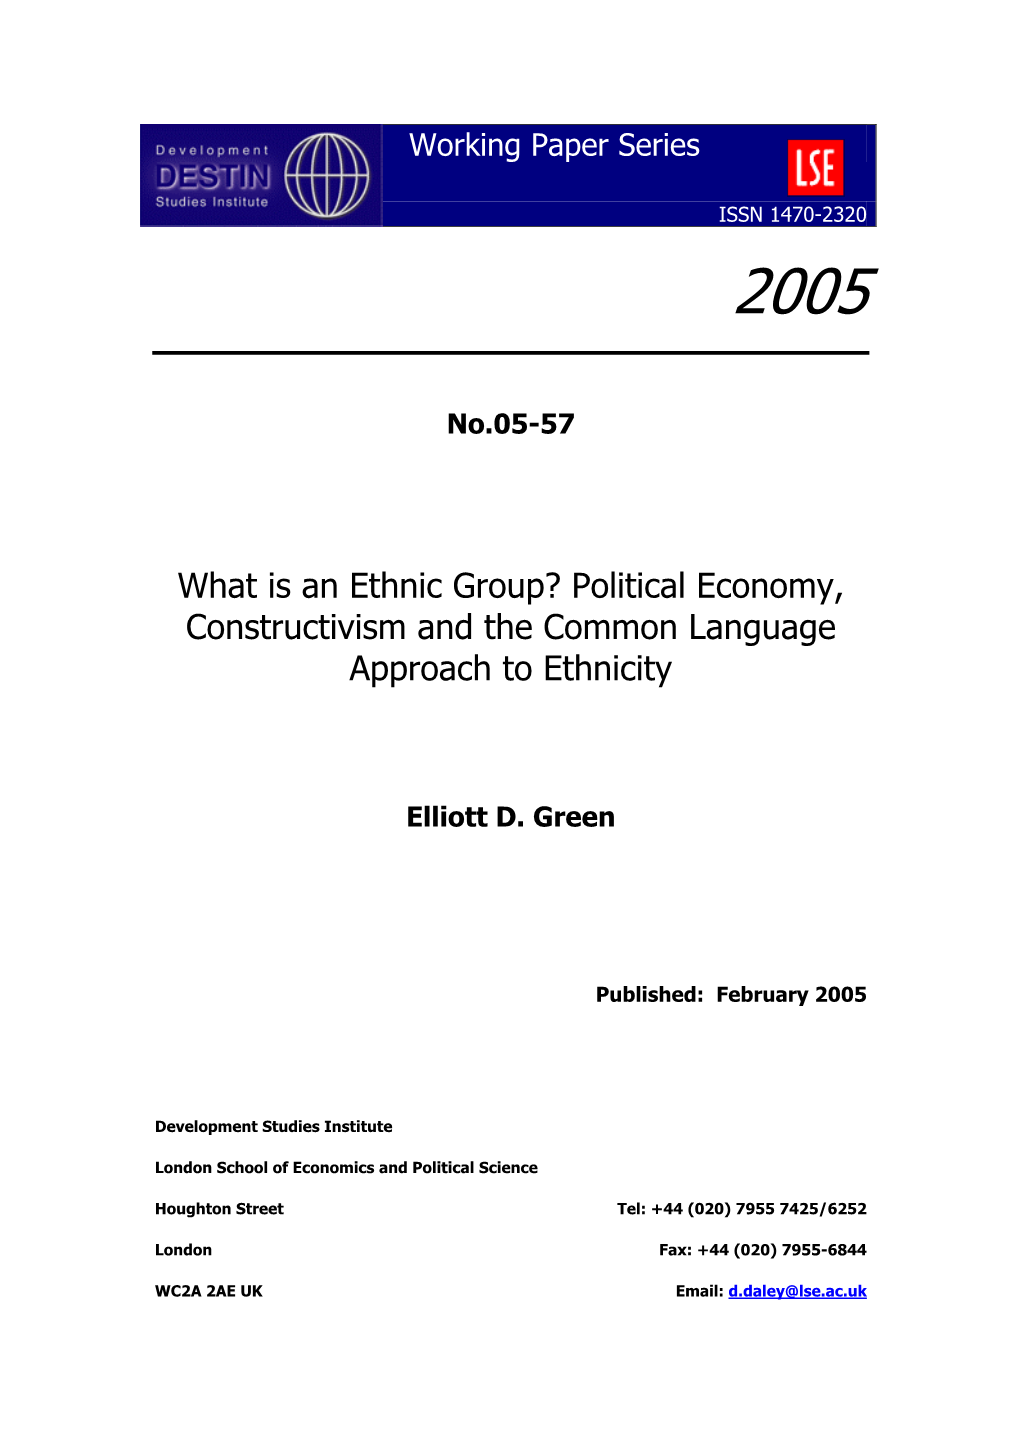 What Is an Ethnic Group? Political Economy, Constructivism and the Common Language Approach to Ethnicity